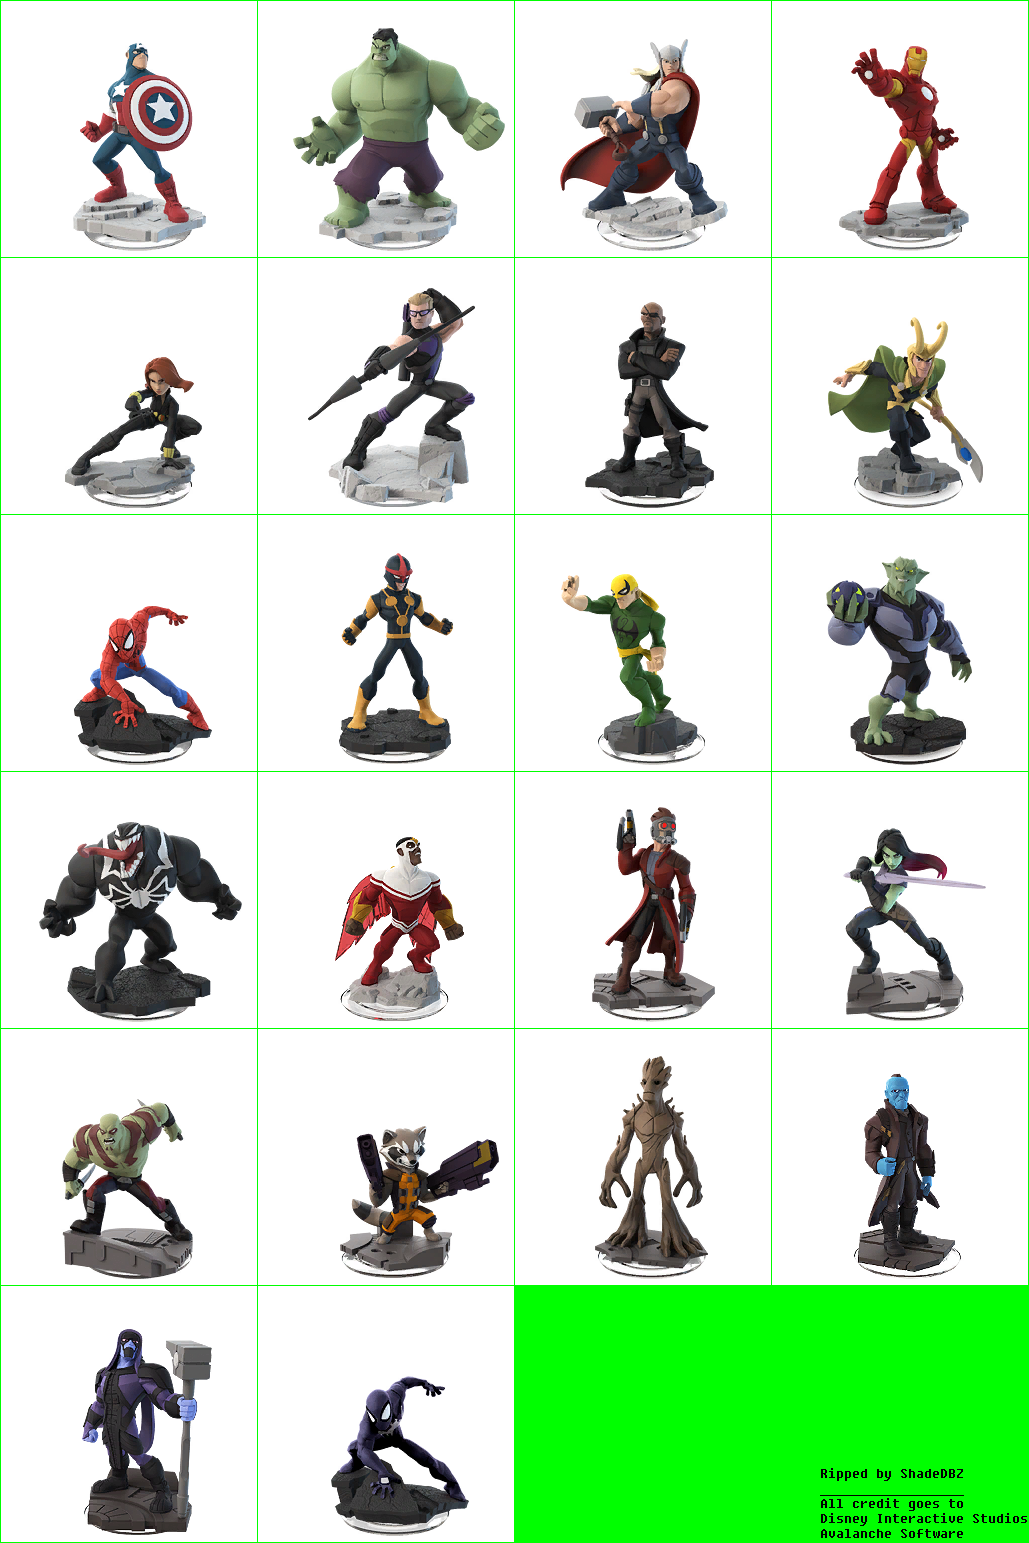 Disney Infinity 2.0 Edition: Marvel Super Heroes - Marvel Character Previews (Small)